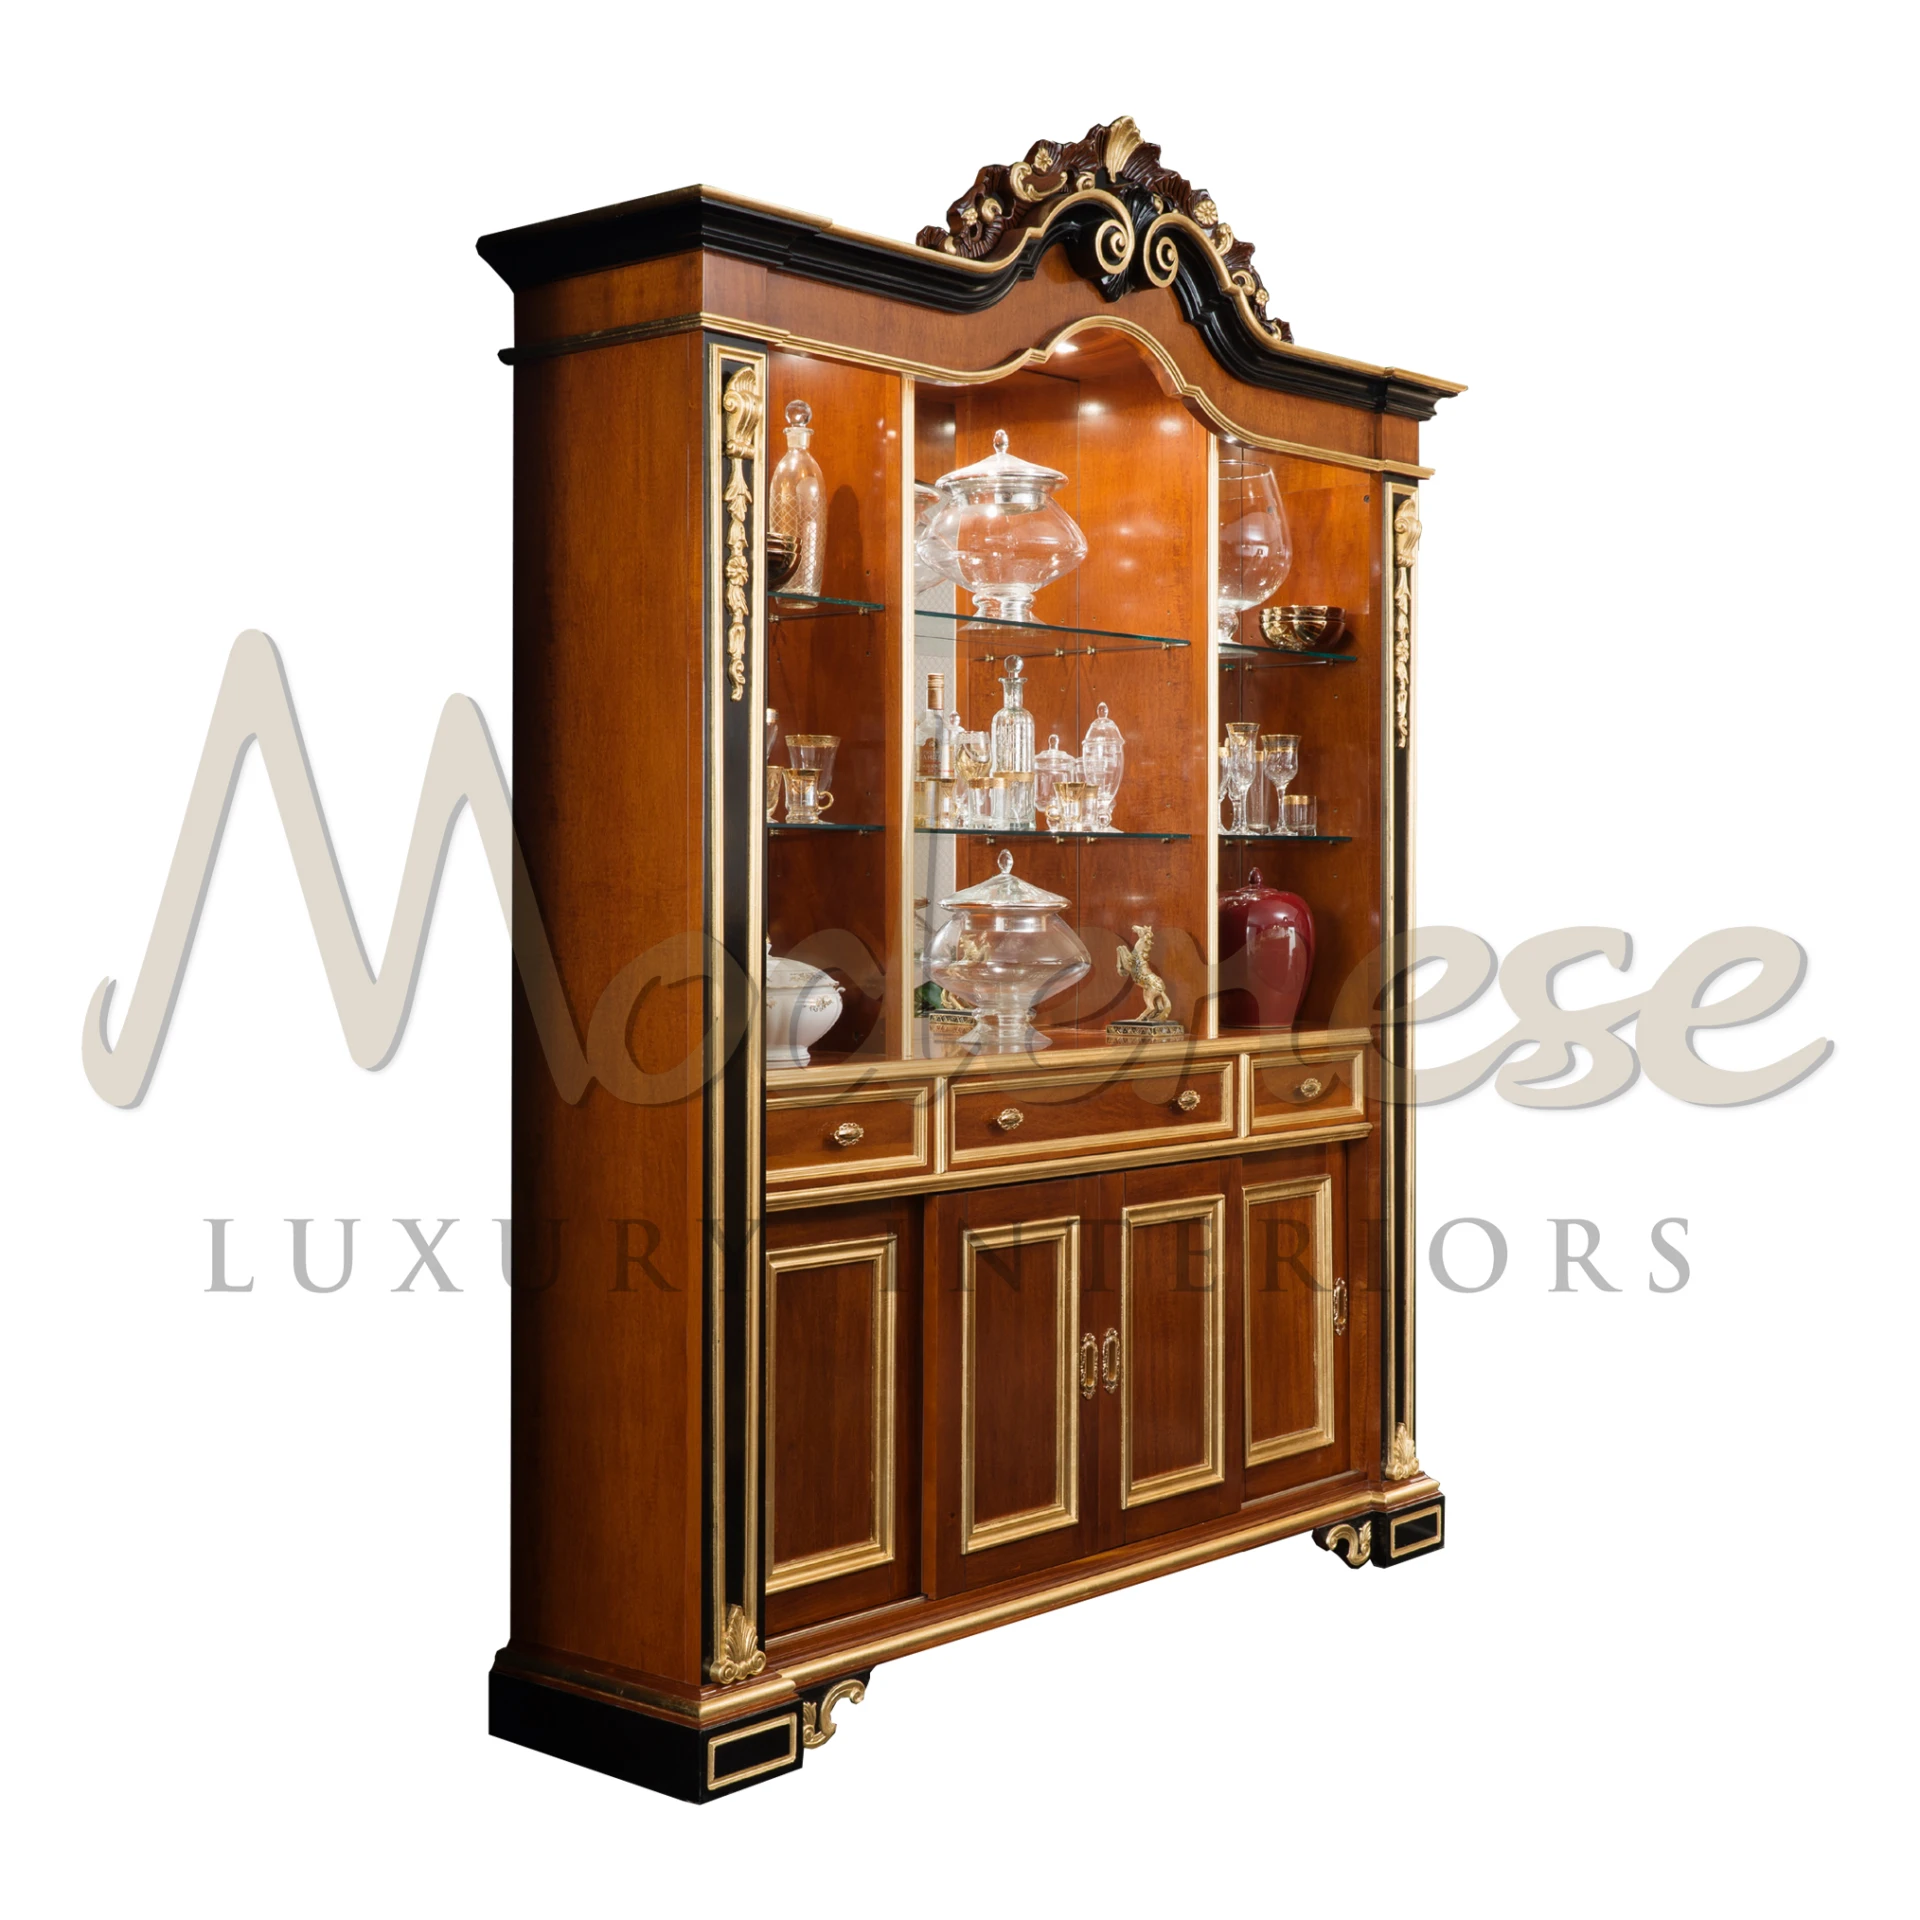 Elegant baroque-style structure in classic walnut finish with black lacquered and gold leaf details. Perfectly complements a paired bar setup.